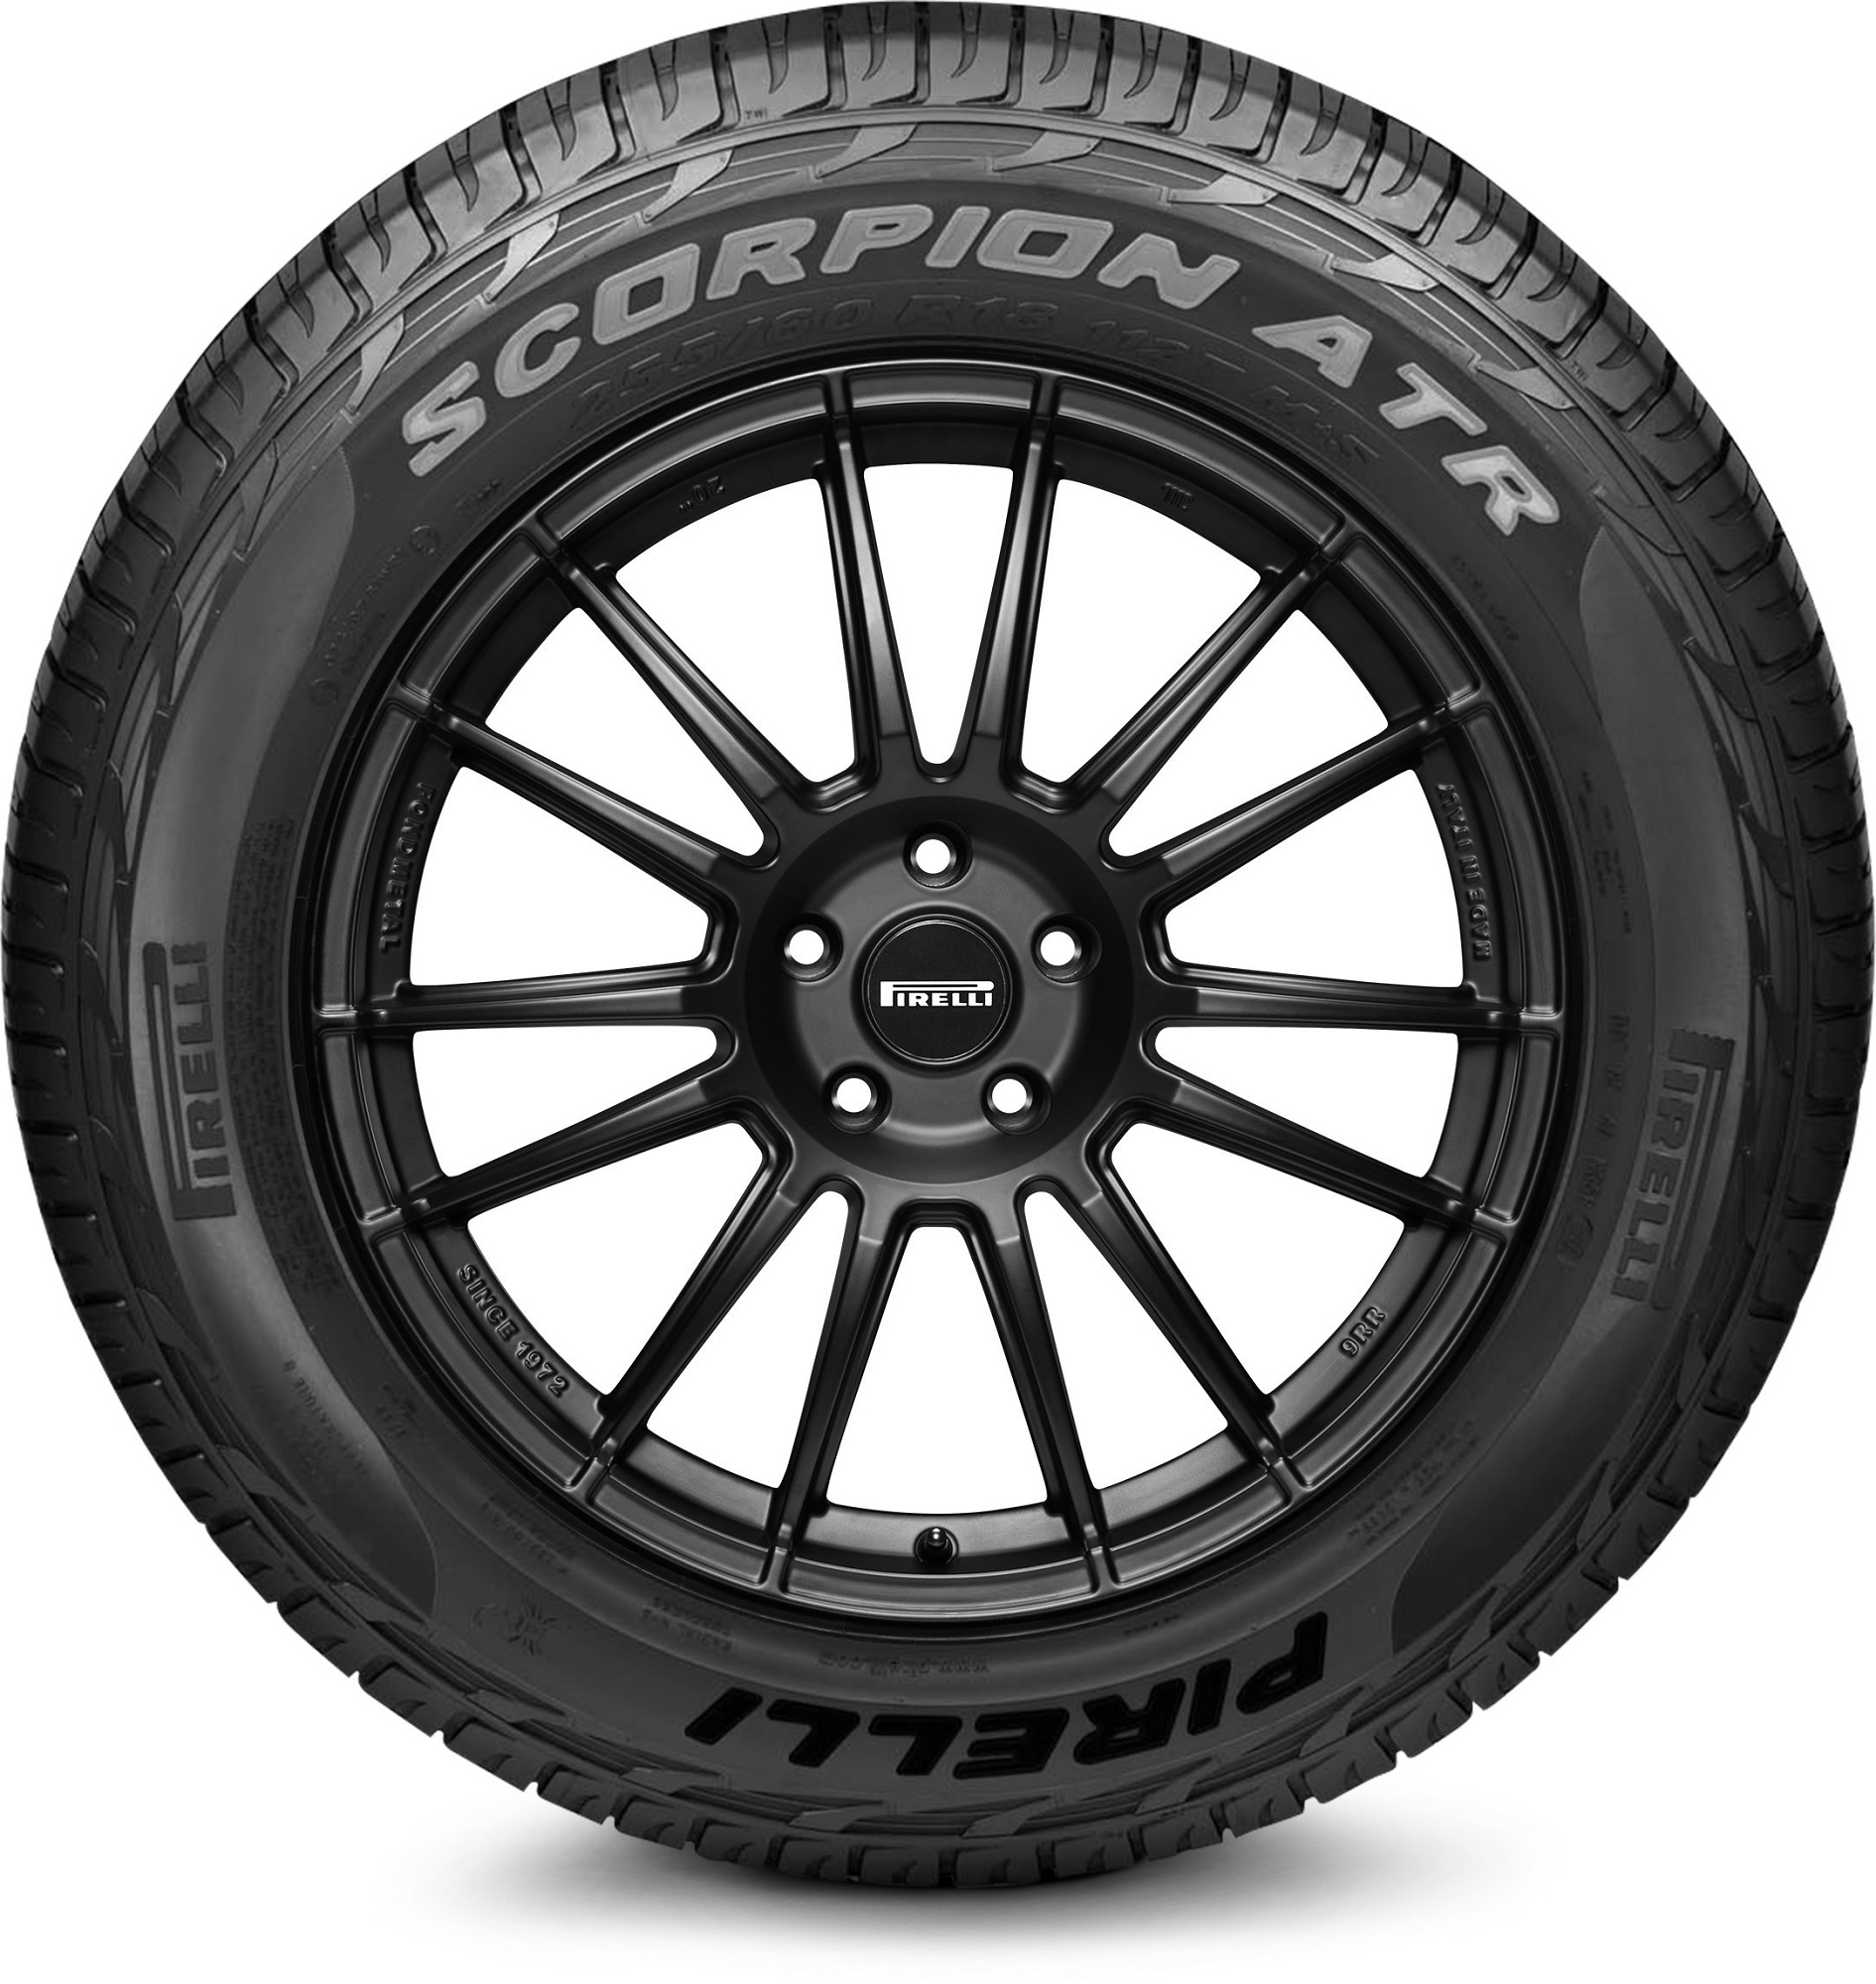 Pirelli: Tailor-Made Scorpion ATR Tires For The All-New 2021 Ford F-150